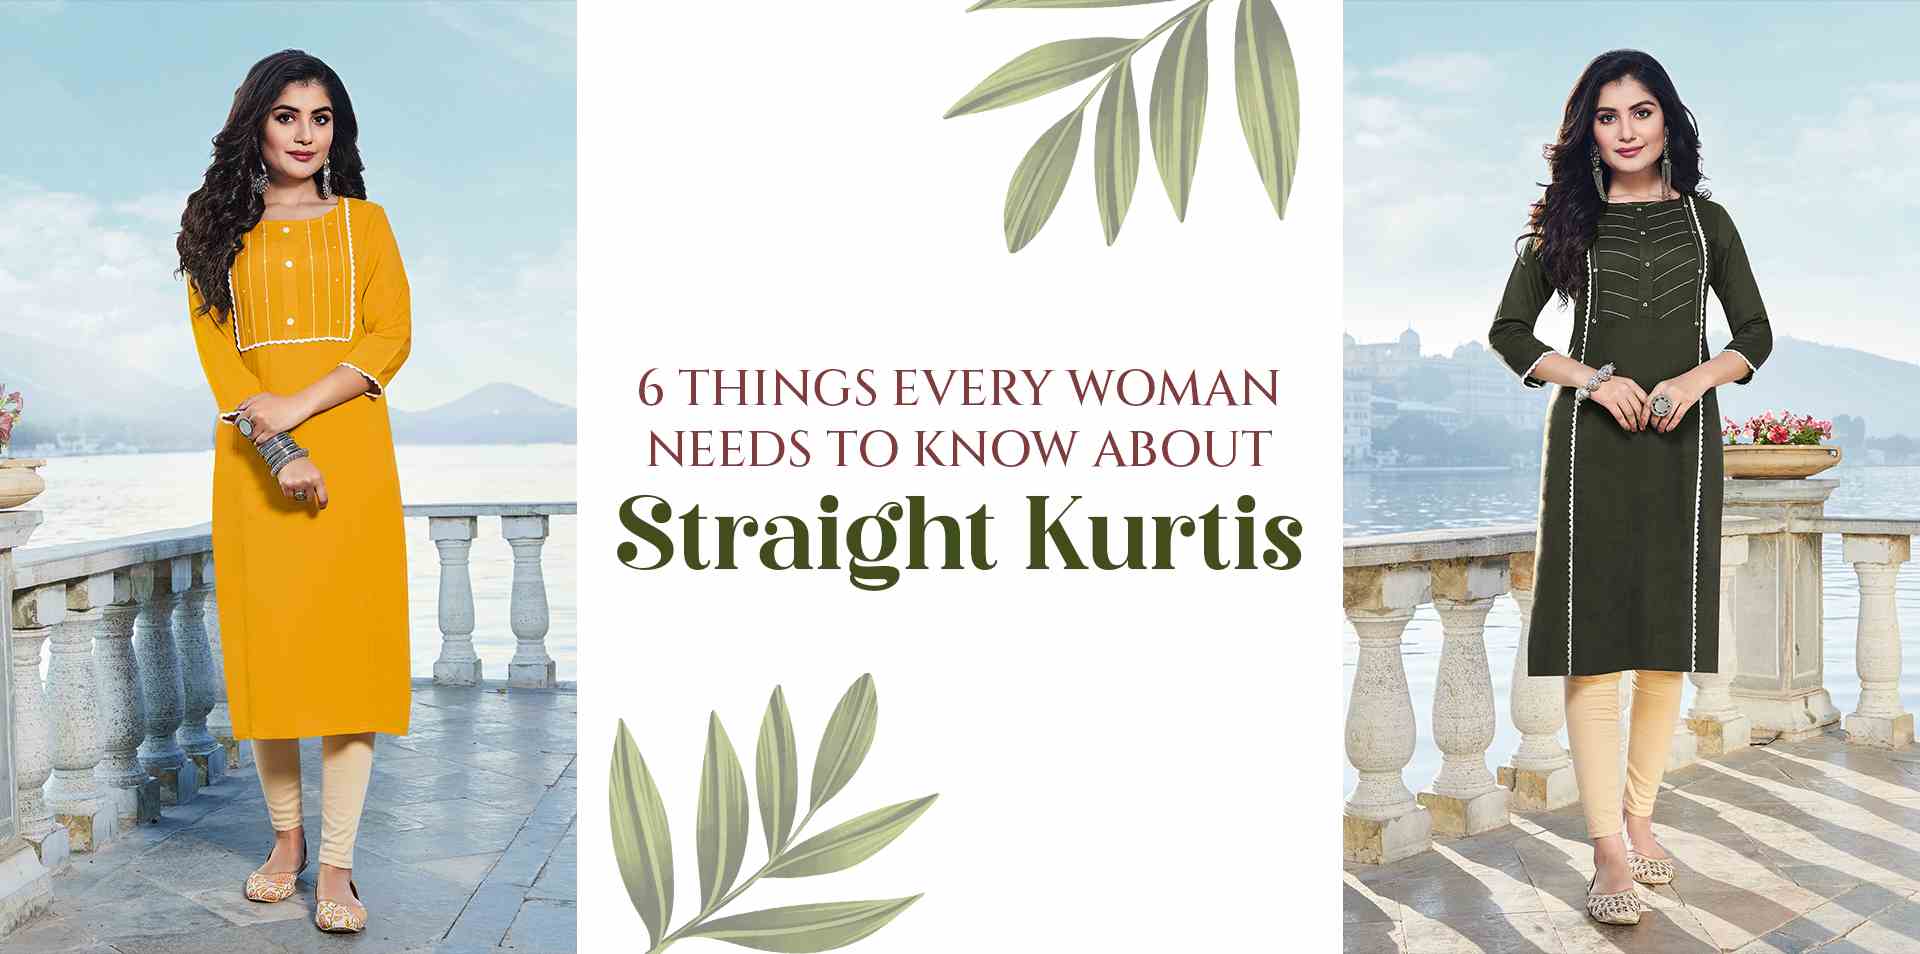 6 Things Every Woman Needs to Know About Straight Kurtis